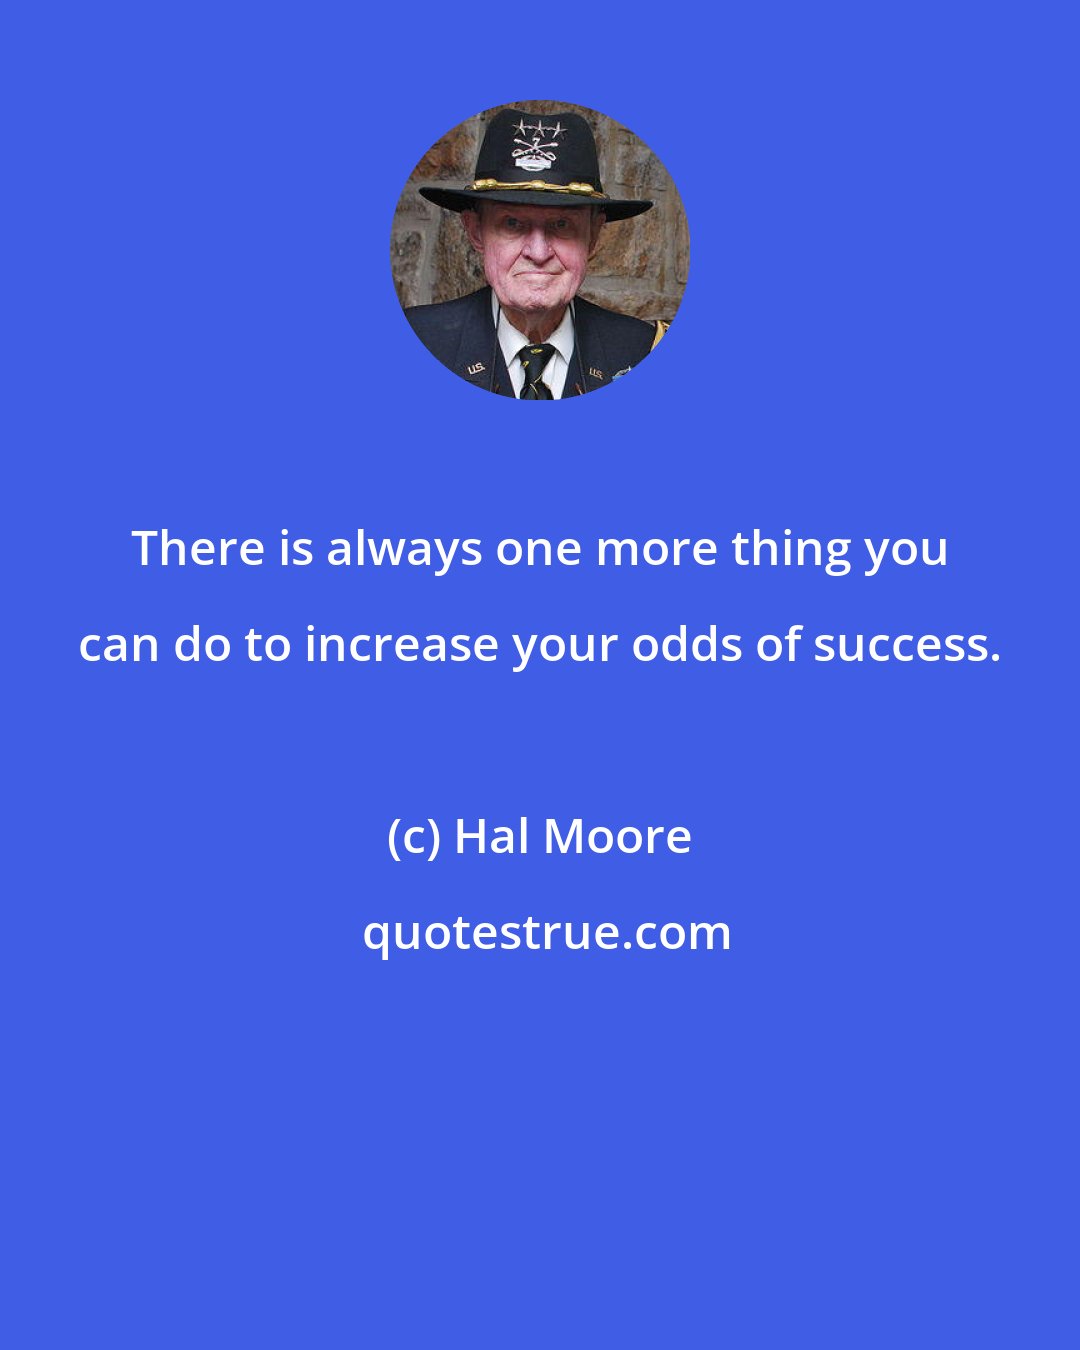 Hal Moore: There is always one more thing you can do to increase your odds of success.